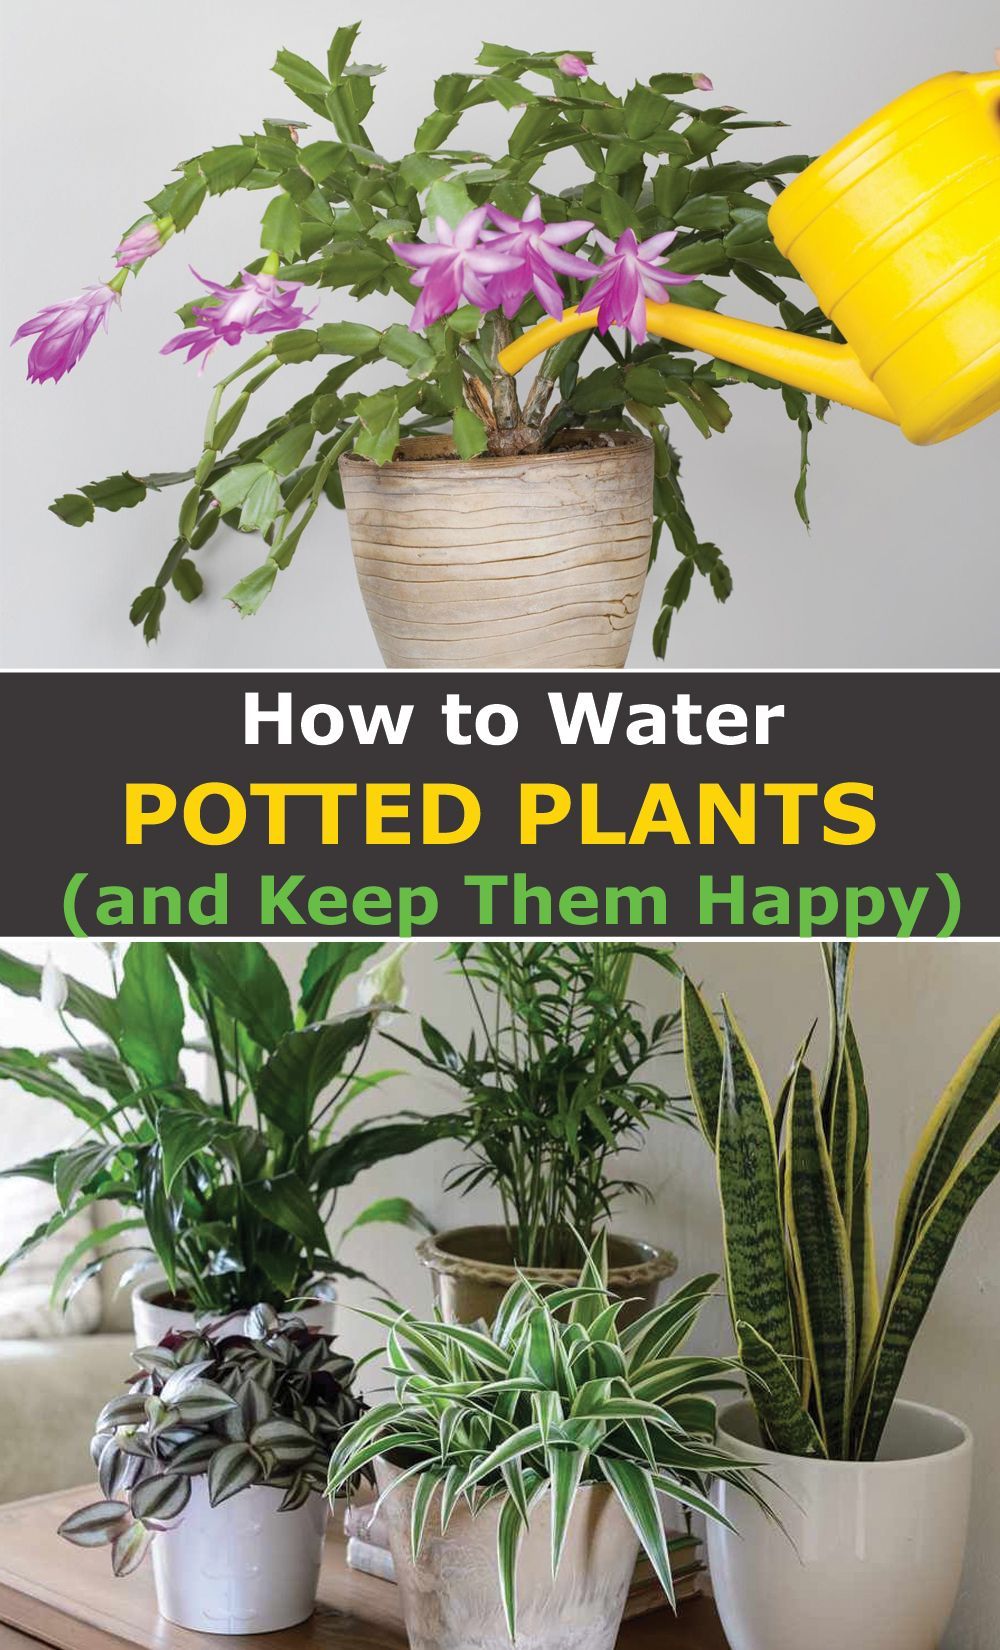 How to Water Potted Plants and Keep them Happy -   19 plants Balcony articles ideas